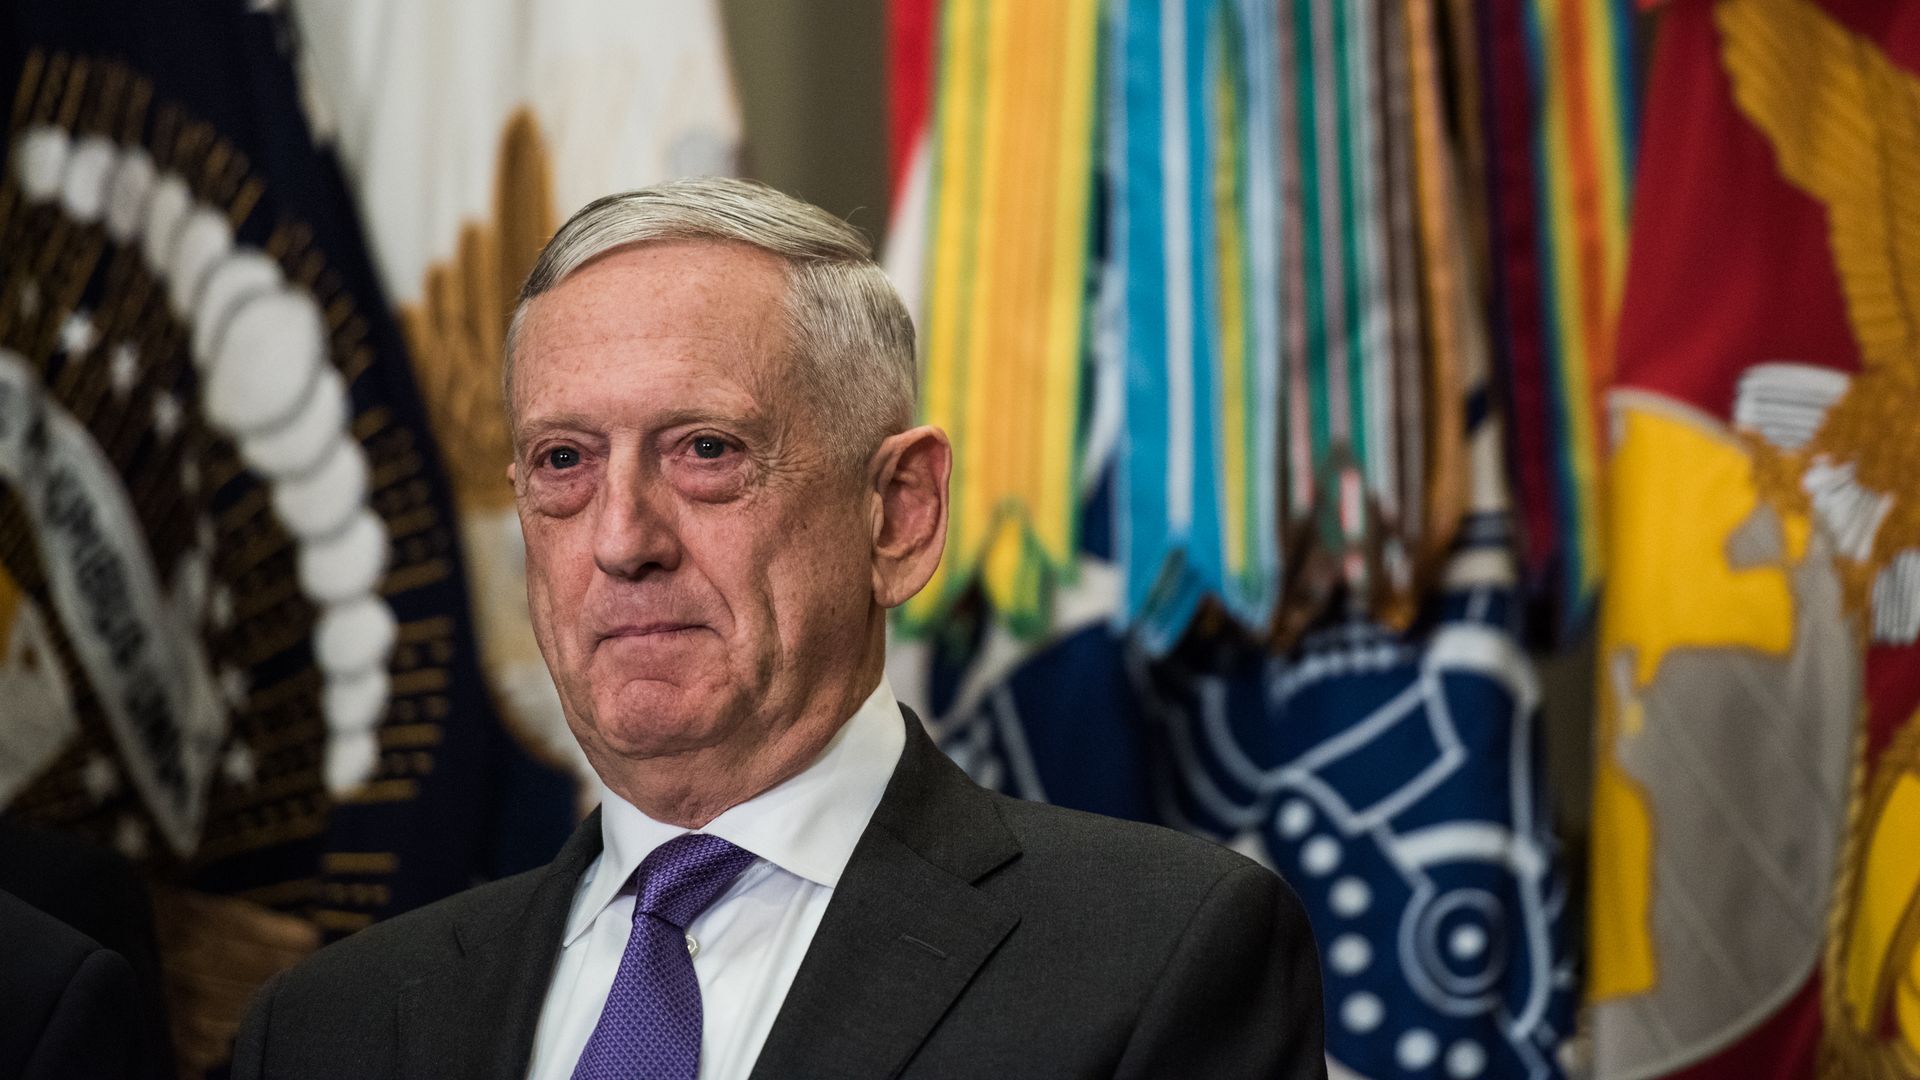 Defense Secretary James Mattis in front of flags in the White House